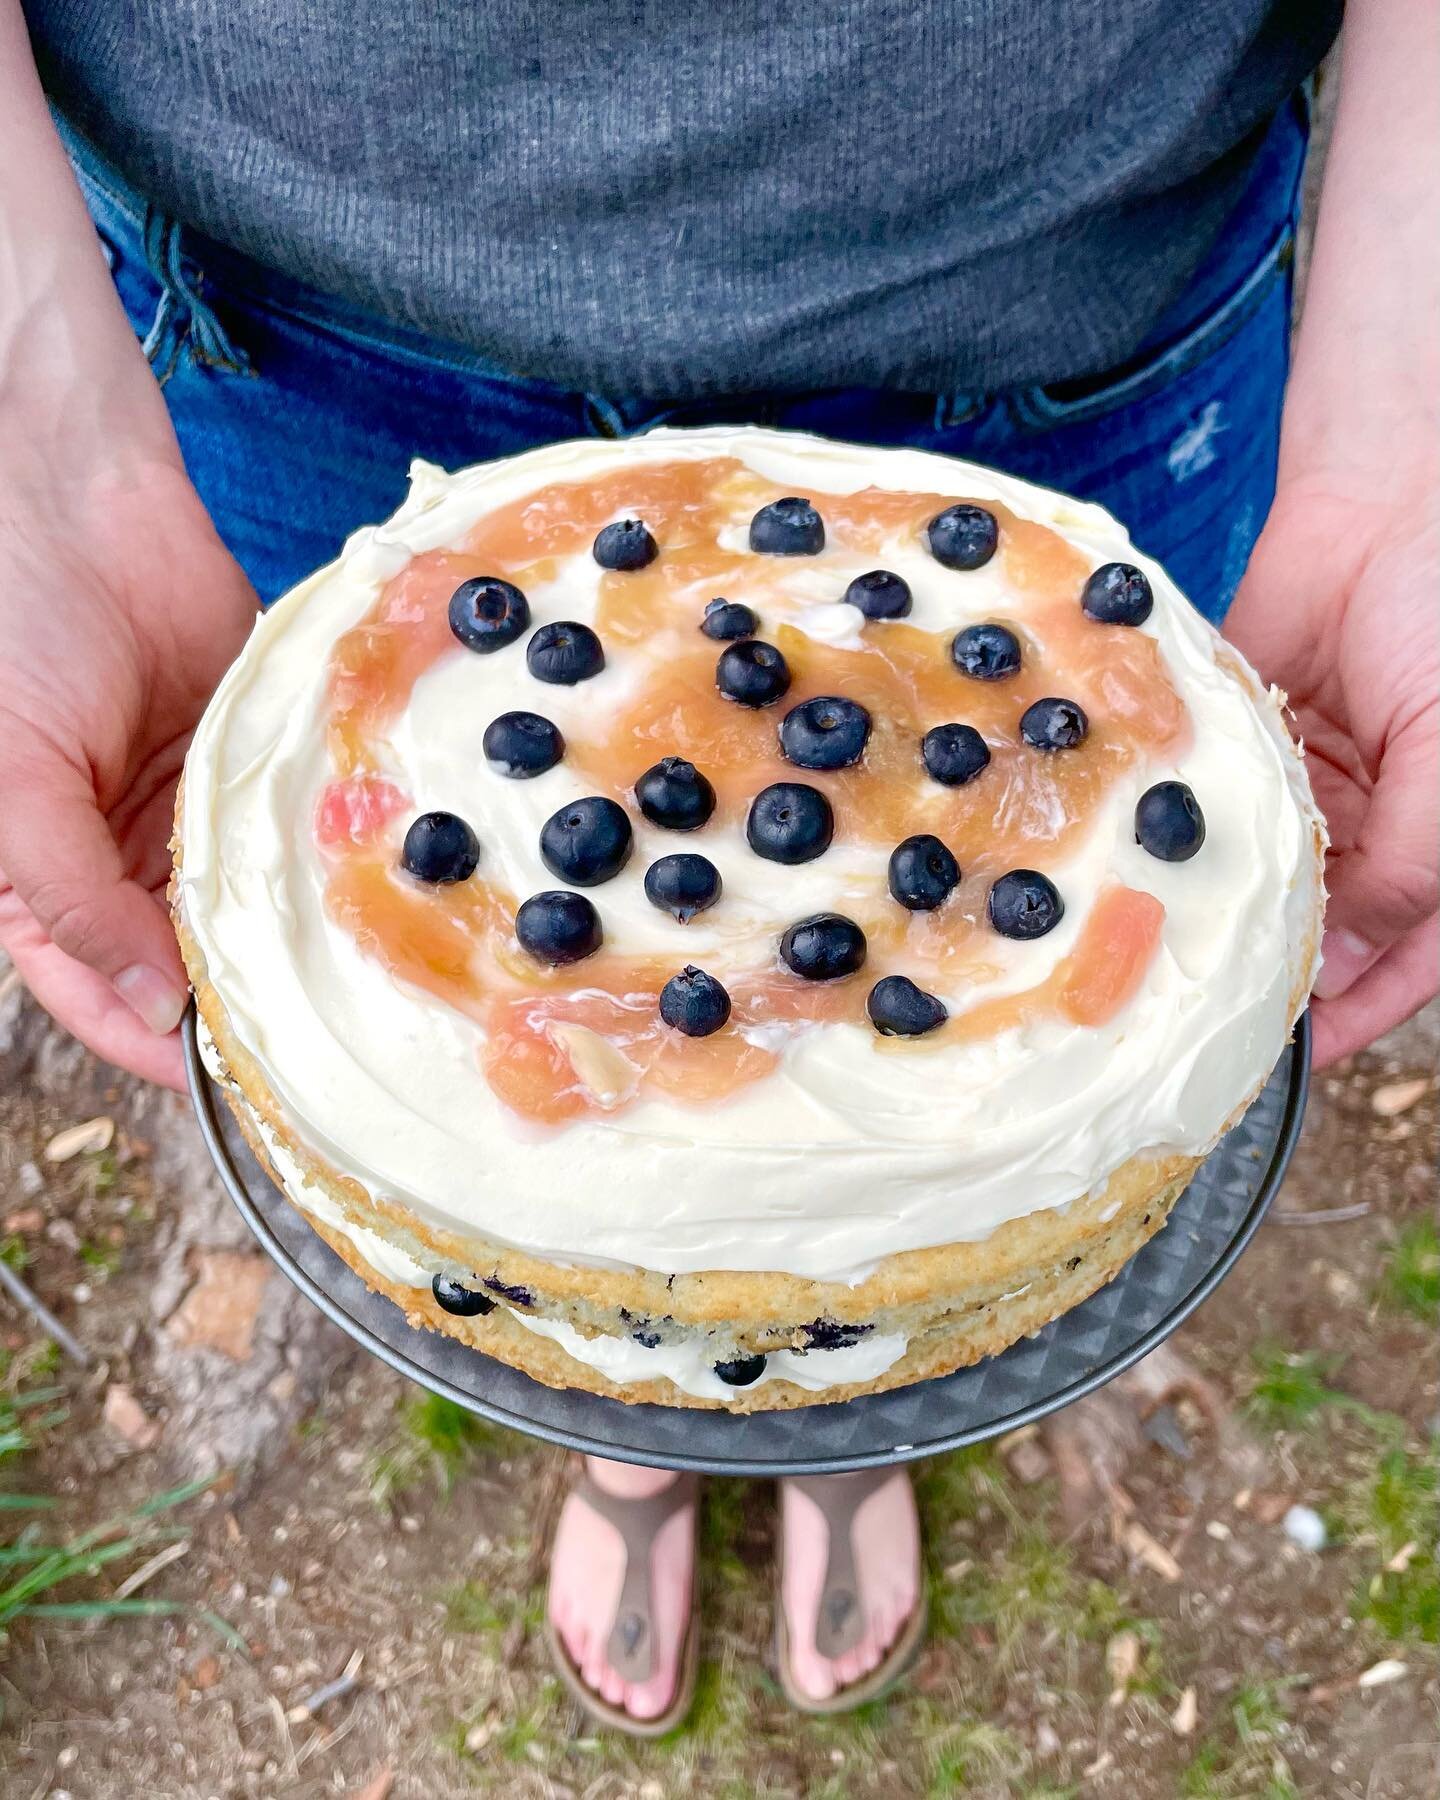 Guess who&rsquo;s not above fancying up a box cake 🙋🏻&zwj;♀️.

This weeks recipe is fancier blueberry rhubarb cake with &ldquo;less sweet&rdquo; cream cheese frosting.

This cake is packed full of juicy blueberries and yummy rhubarb sauce that&rsqu